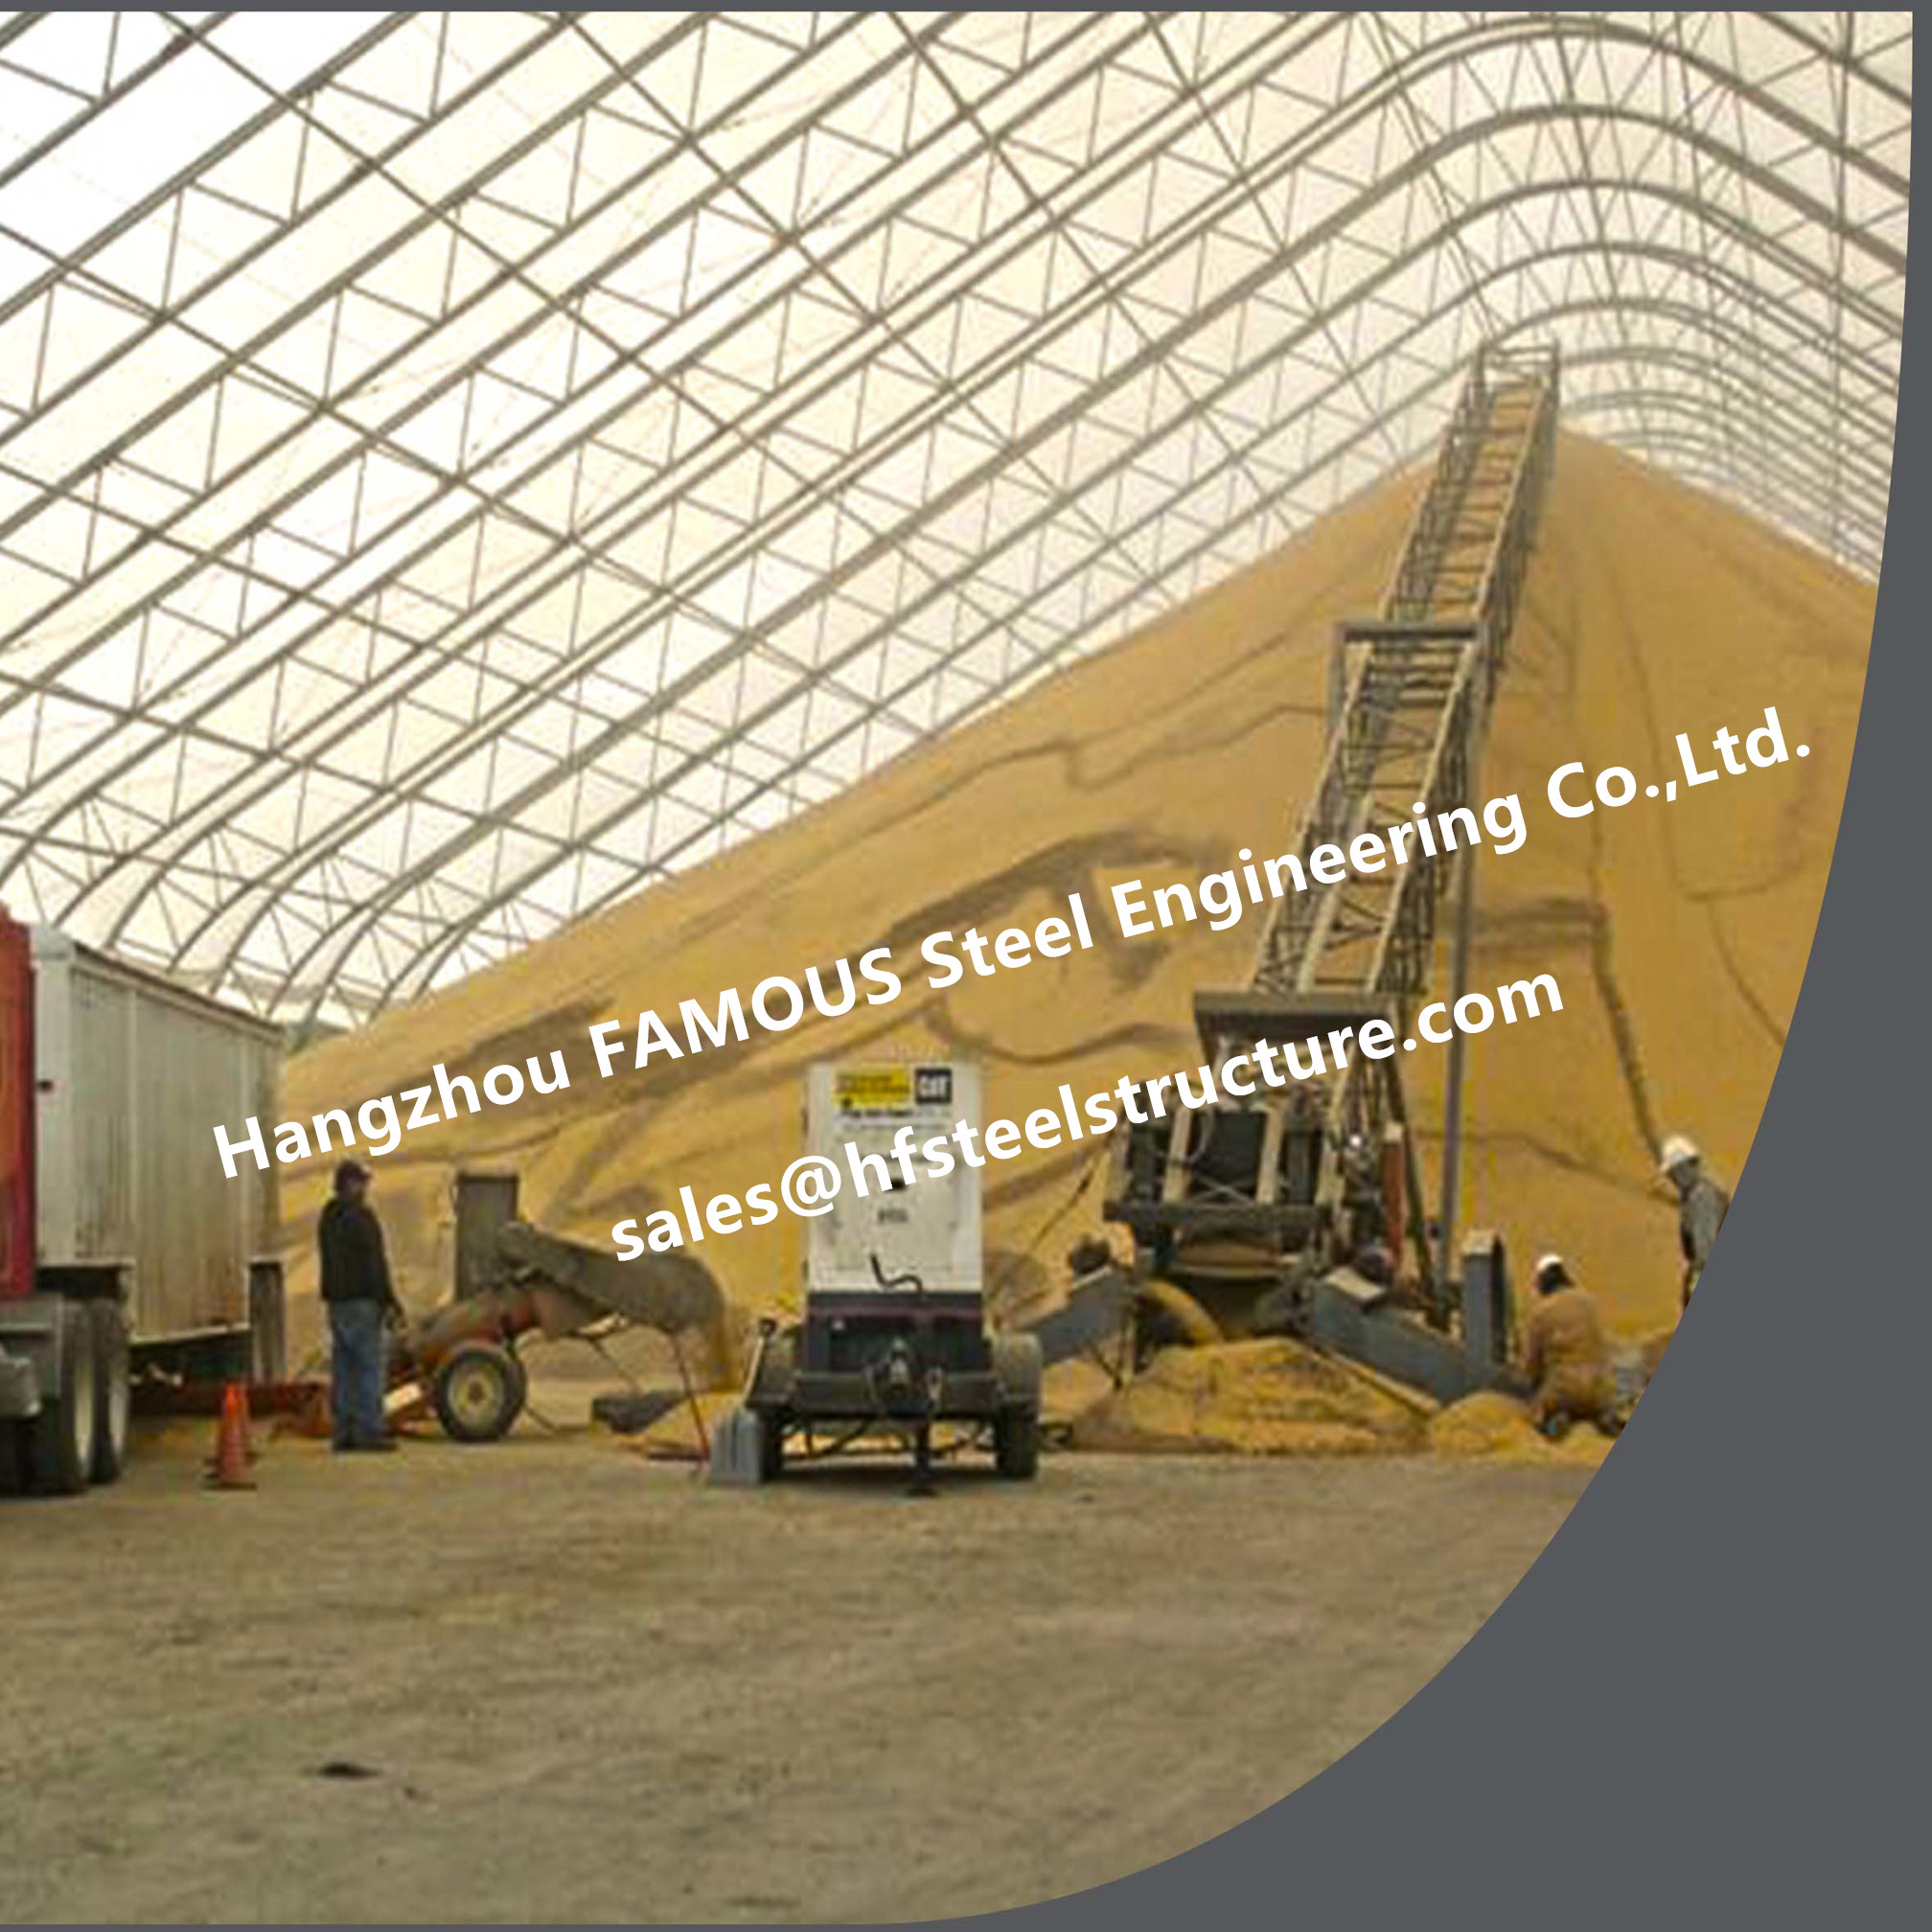 Aluminum Plate Flat Rolls - High Space Steel Framed Warehouse Buildings With Arch Roof For Barn Storage And Poultry Shed – FAMOUS